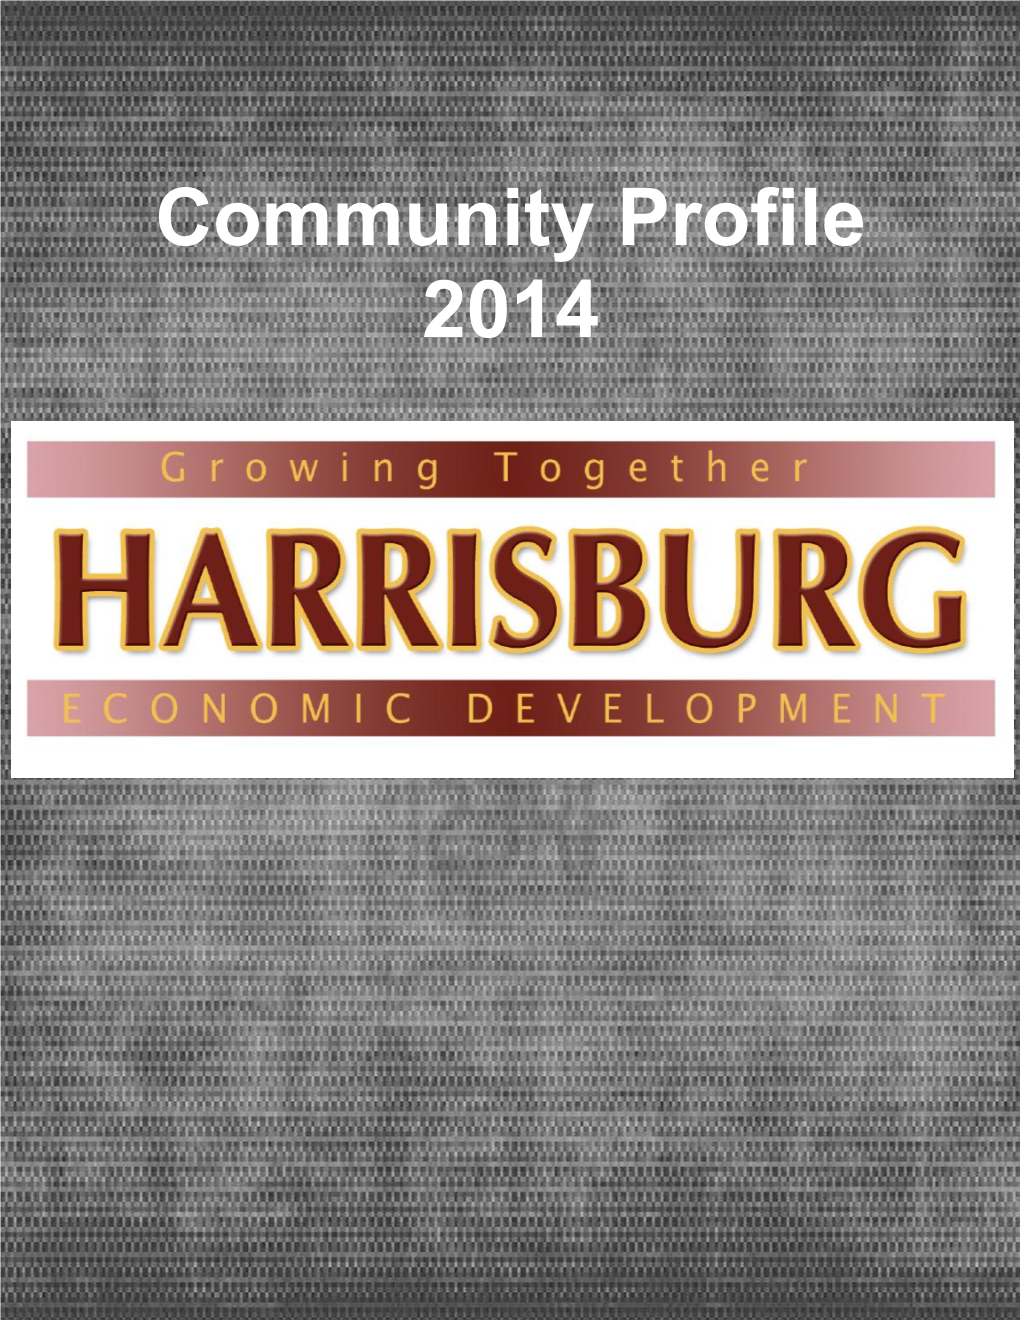 Harrisburg Economic Development Corporation Would Like to Thank You for Your Interest in the City of Harrisburg